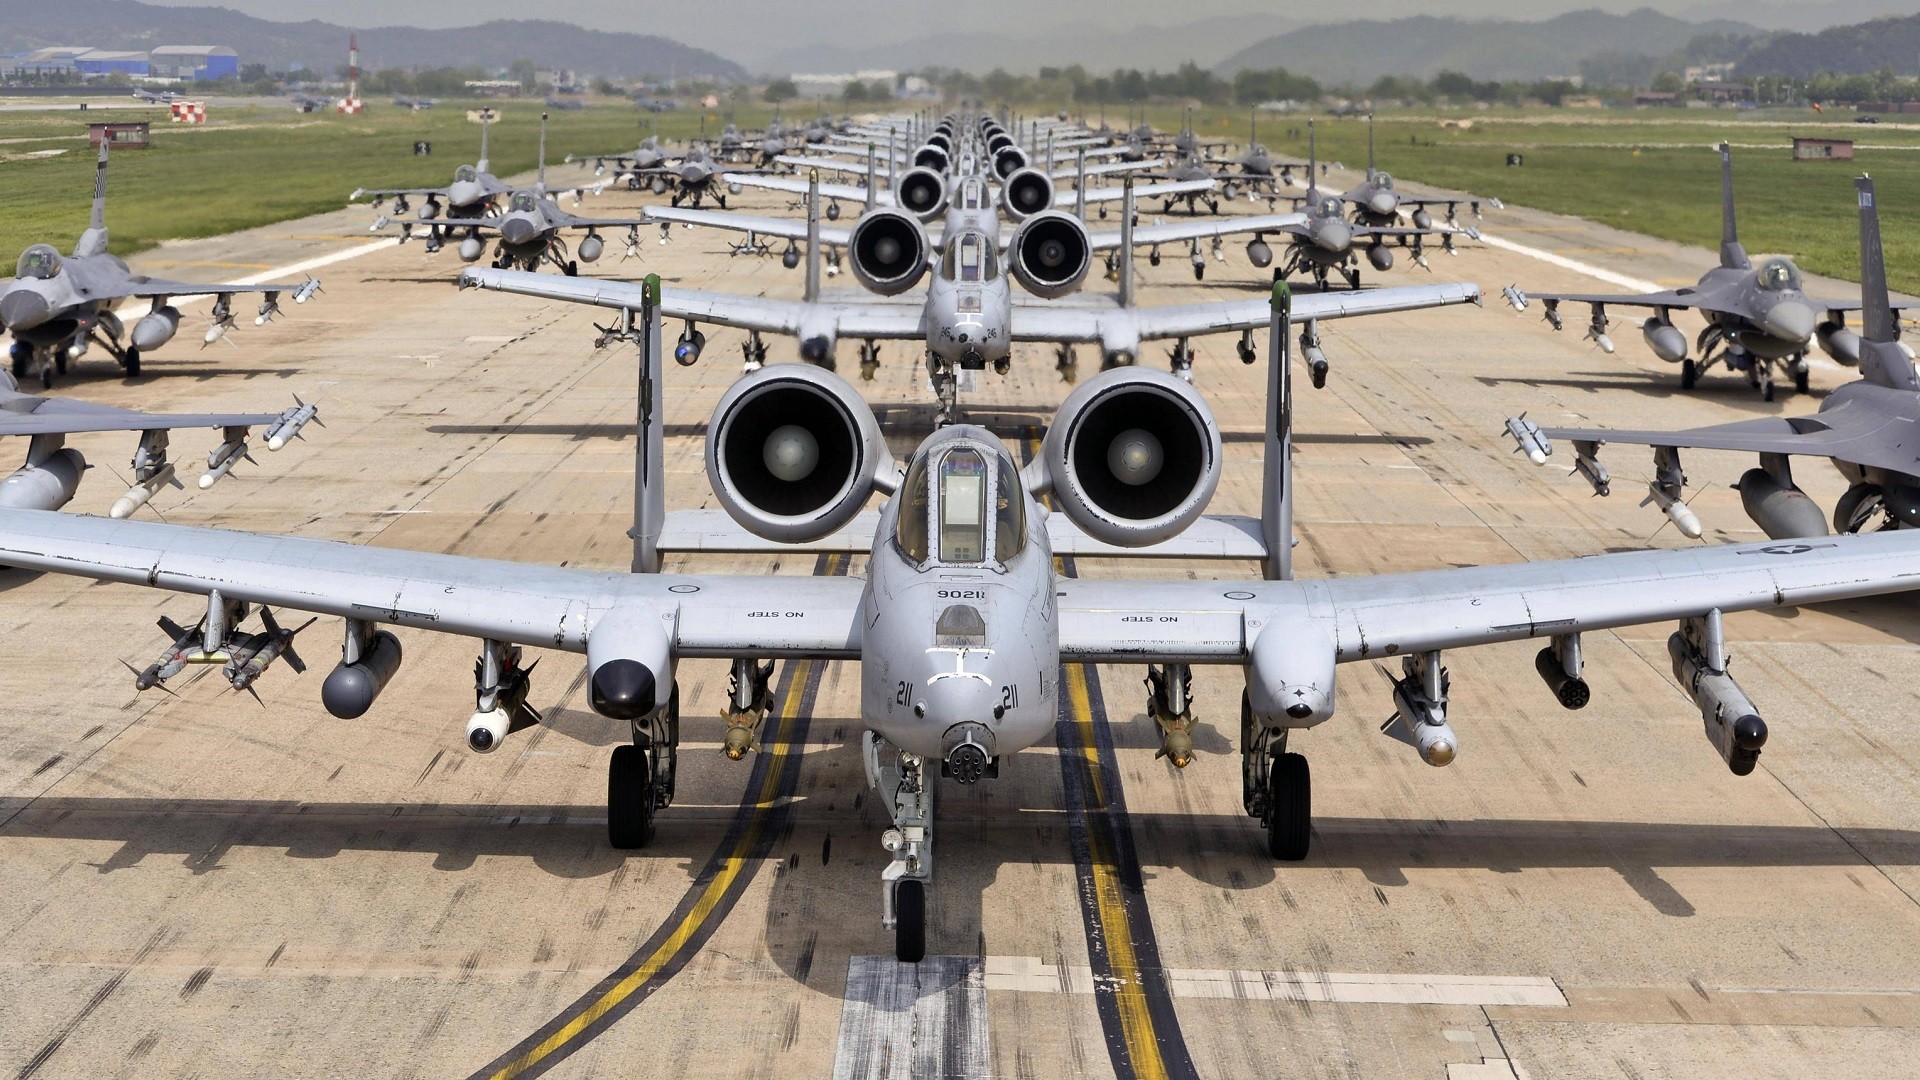 General 1920x1080 Fairchild Republic A-10 Thunderbolt II General Dynamics F-16 Fighting Falcon aircraft military military aircraft military vehicle Elephant Walk jets airplane US Air Force South Korea 2016 (year) runway jet fighter Attacker military base line-up American aircraft